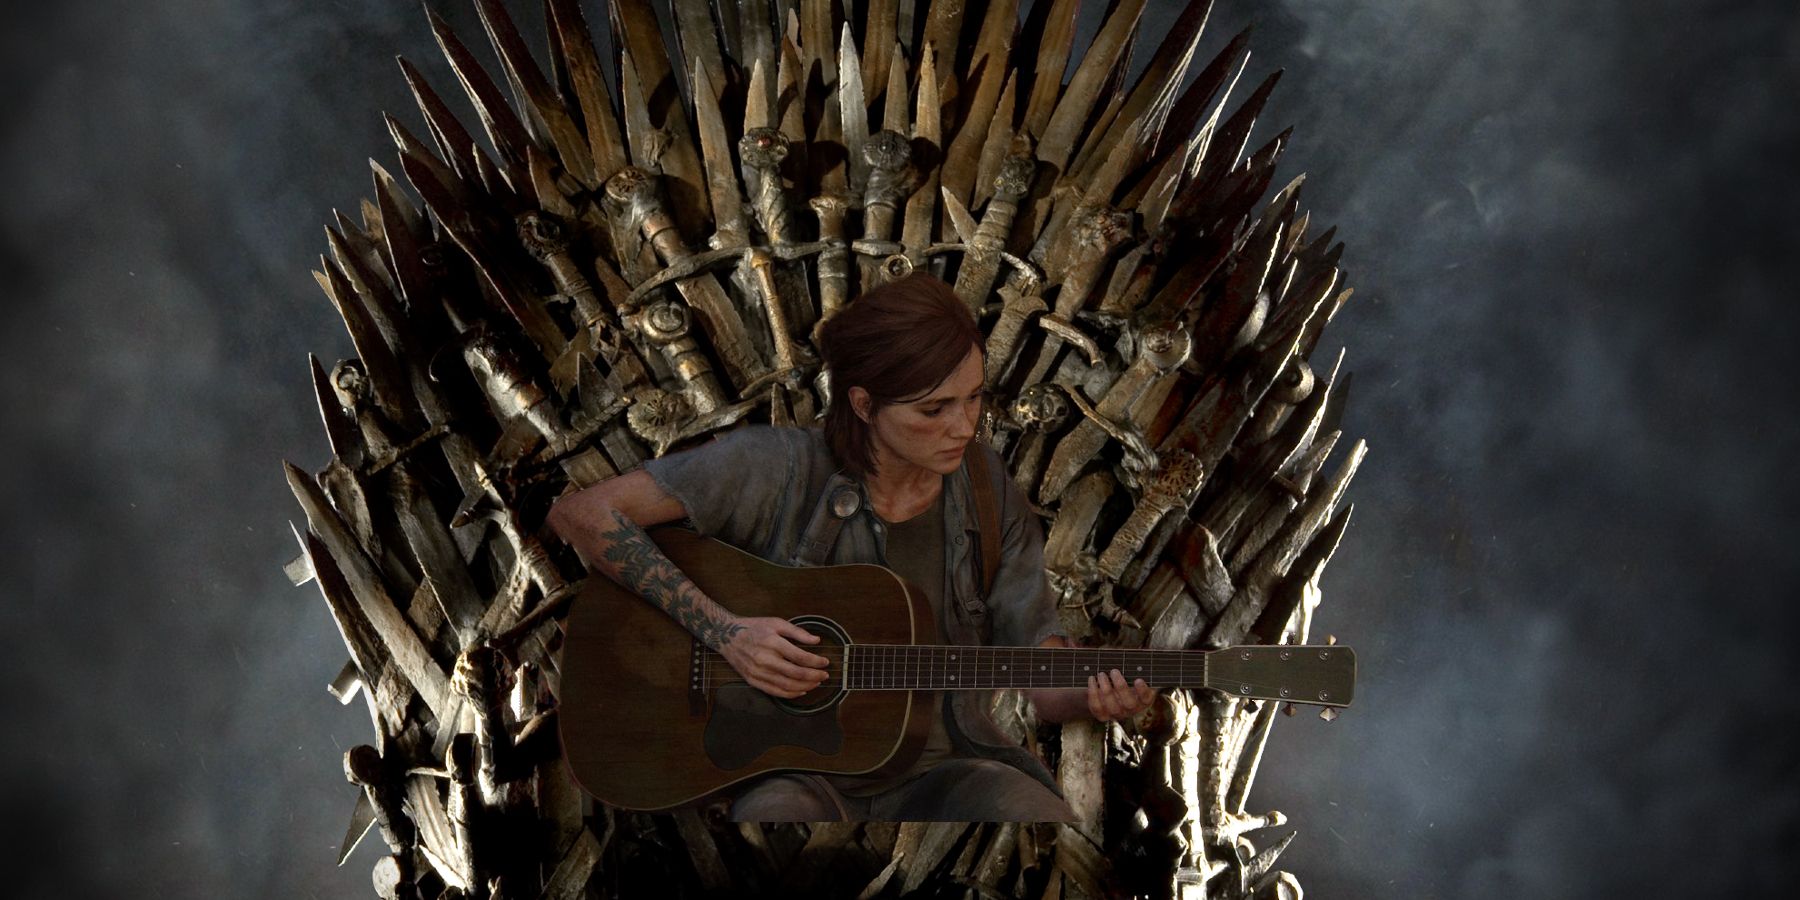 HBO's 'Last of Us' Won't Have the Same Problem As 'Game of Thrones